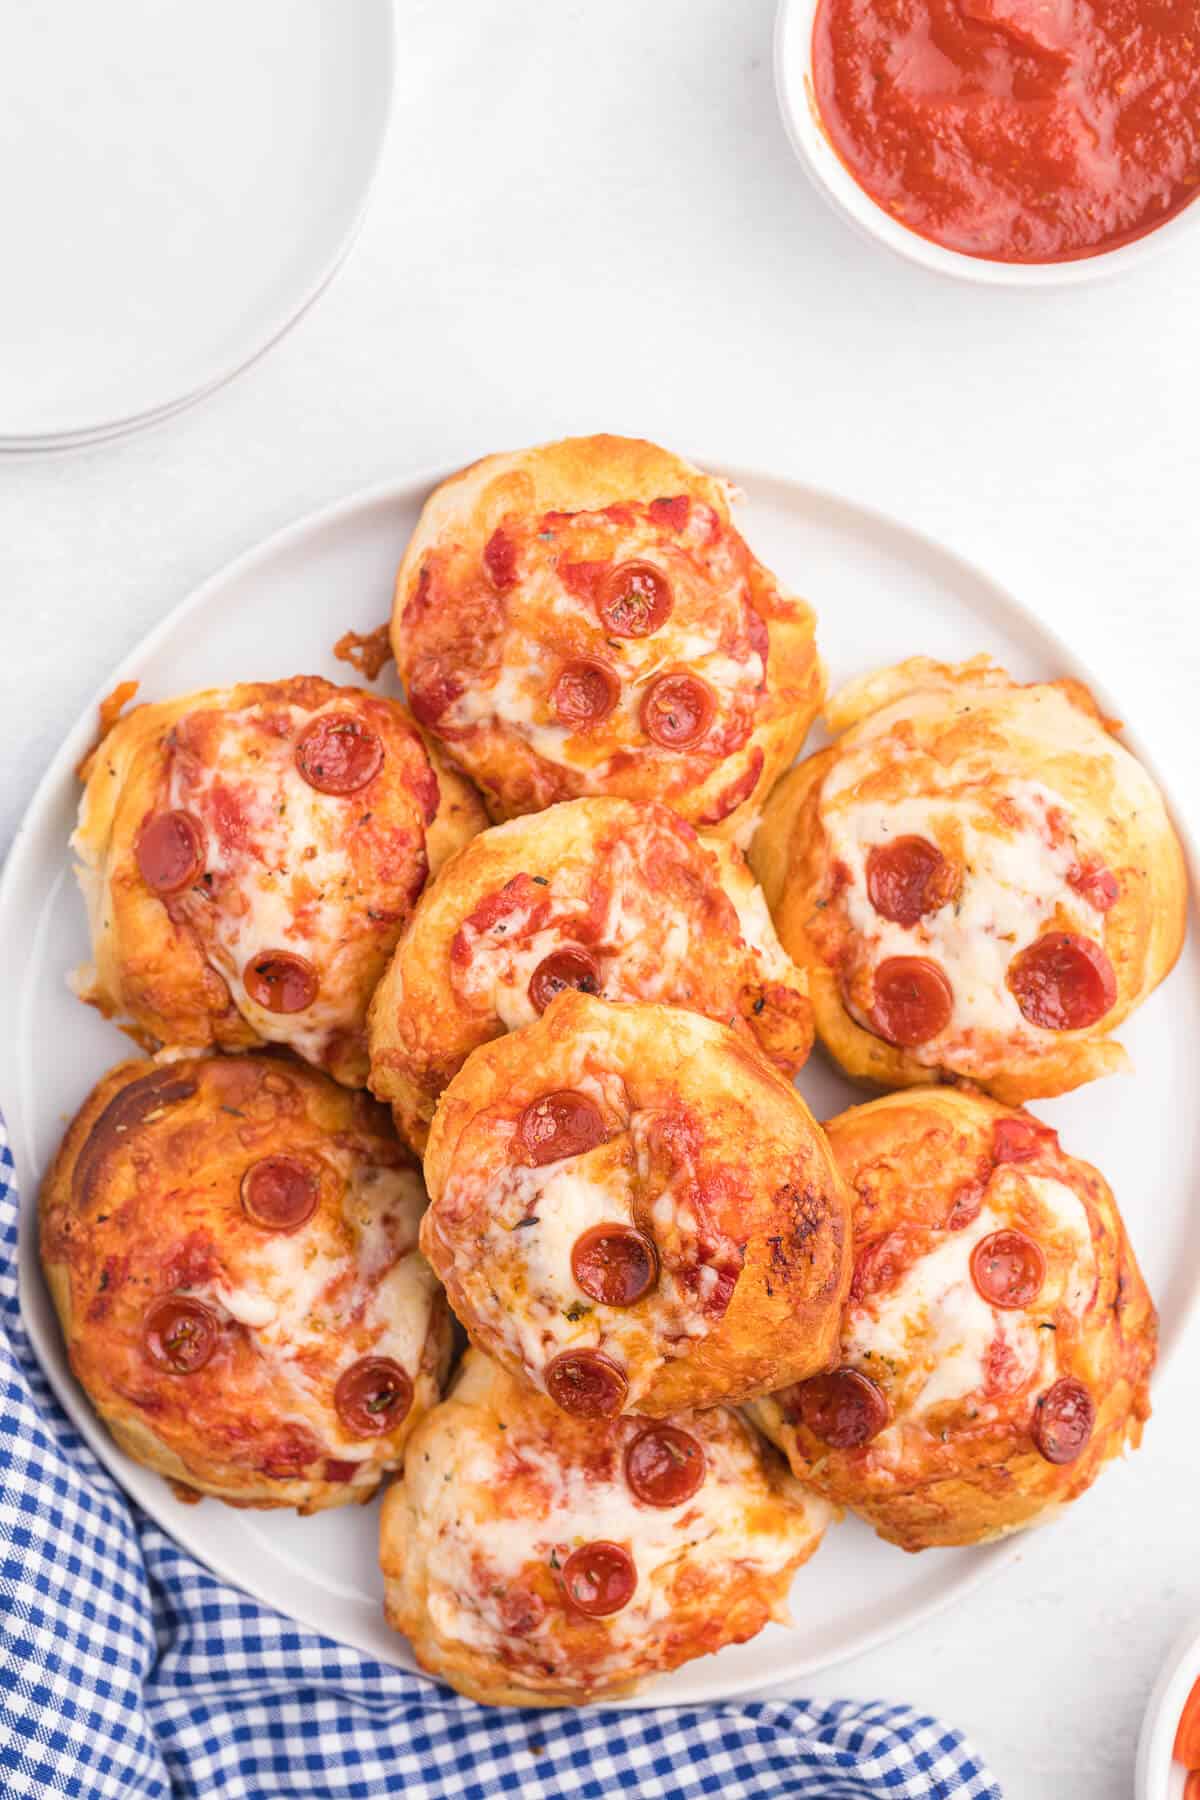 Air Fryer Pizza Buns - This simple recipe is perfect for snacking, an appetizer or for your kids' school lunch. Air fried to golden perfection, these savory buns are easy to make with refrigerated dough, pizza sauce, mozzarella cheese and pepperoni.